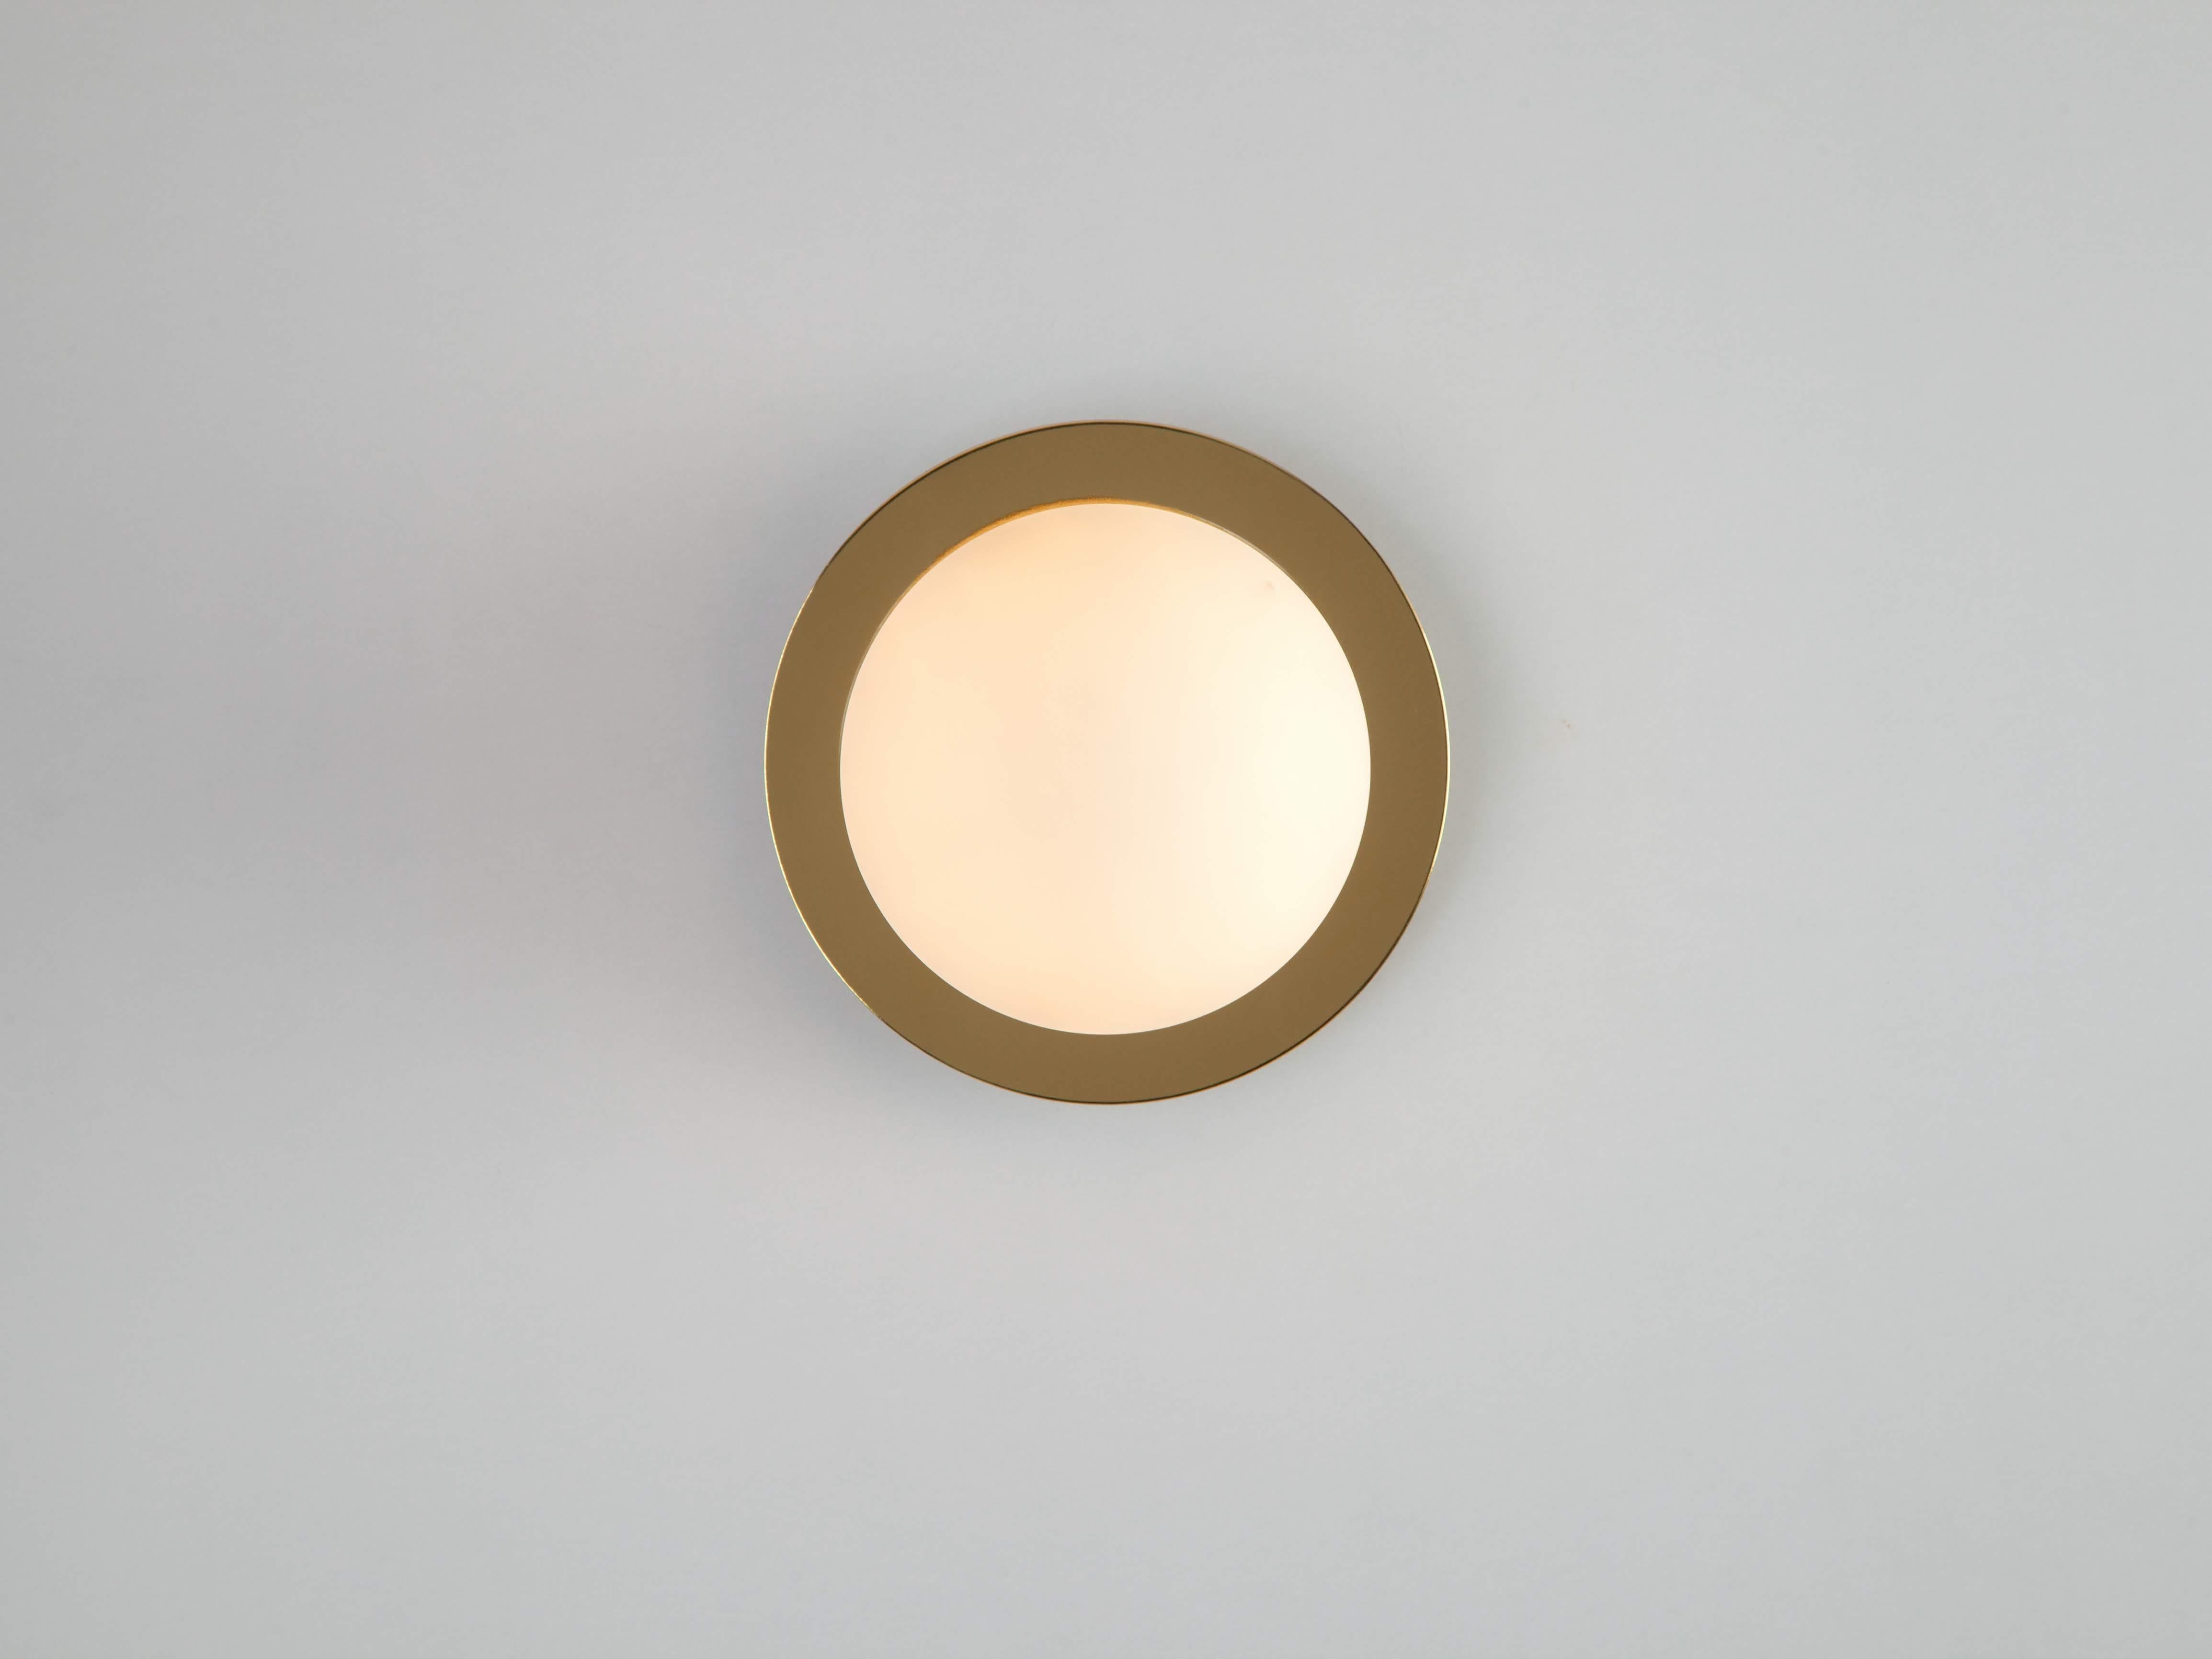 This modern wall light works everywhere. The disk mounted, opal glass shade, diffuses a warm illuminating glow. Ideal for a living space, kitchen, bedroom or bathroom. Our Brass is the houseof staple that accentuates and emphasises. The polished